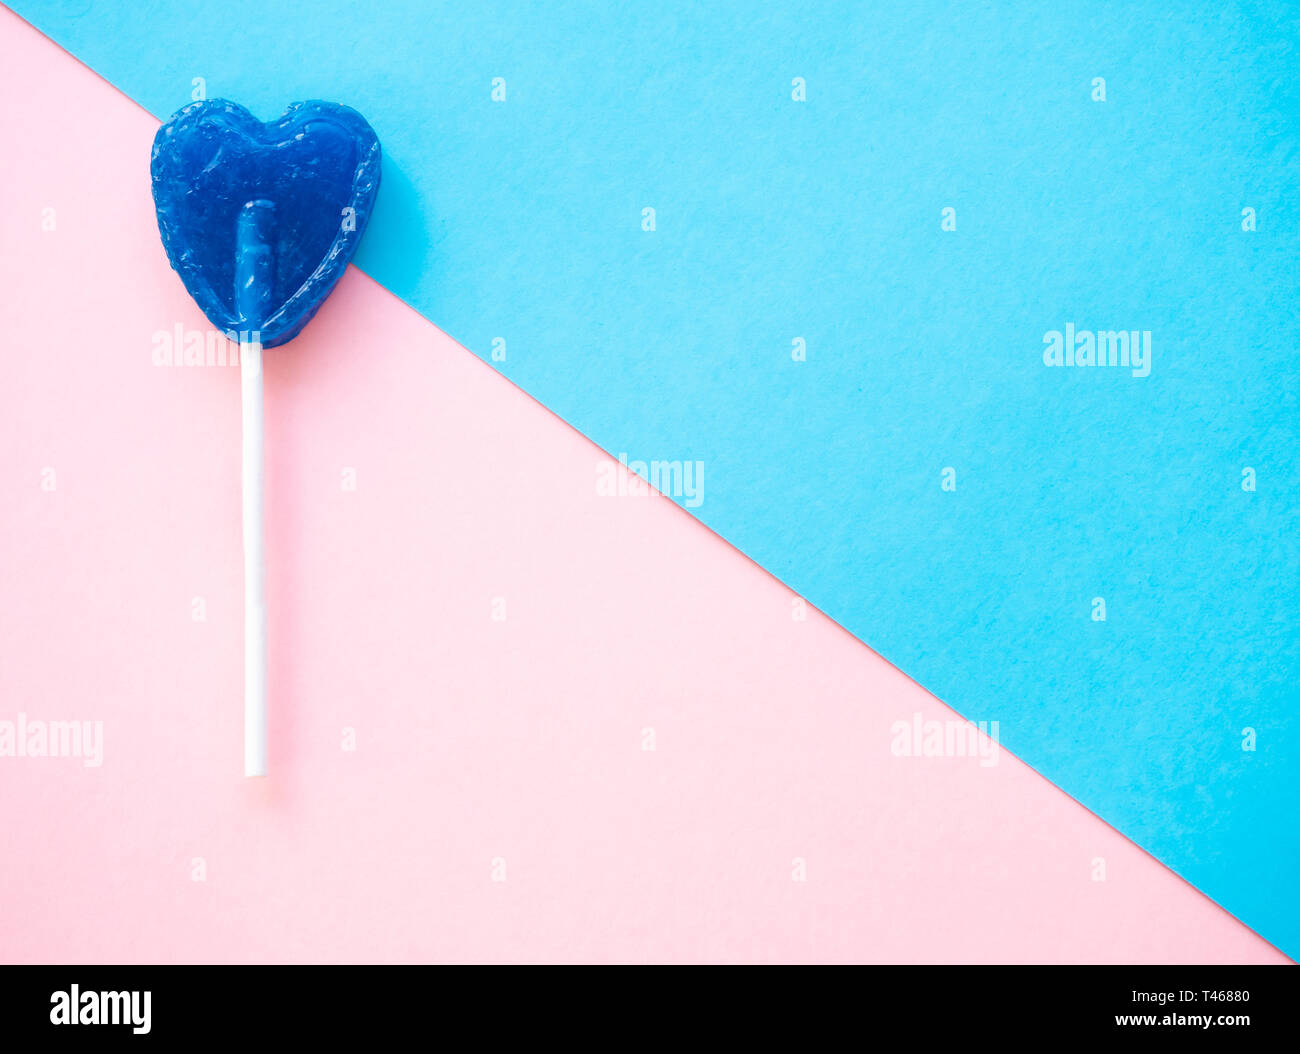 Blue lollipop on a pink and blue background Stock Photo